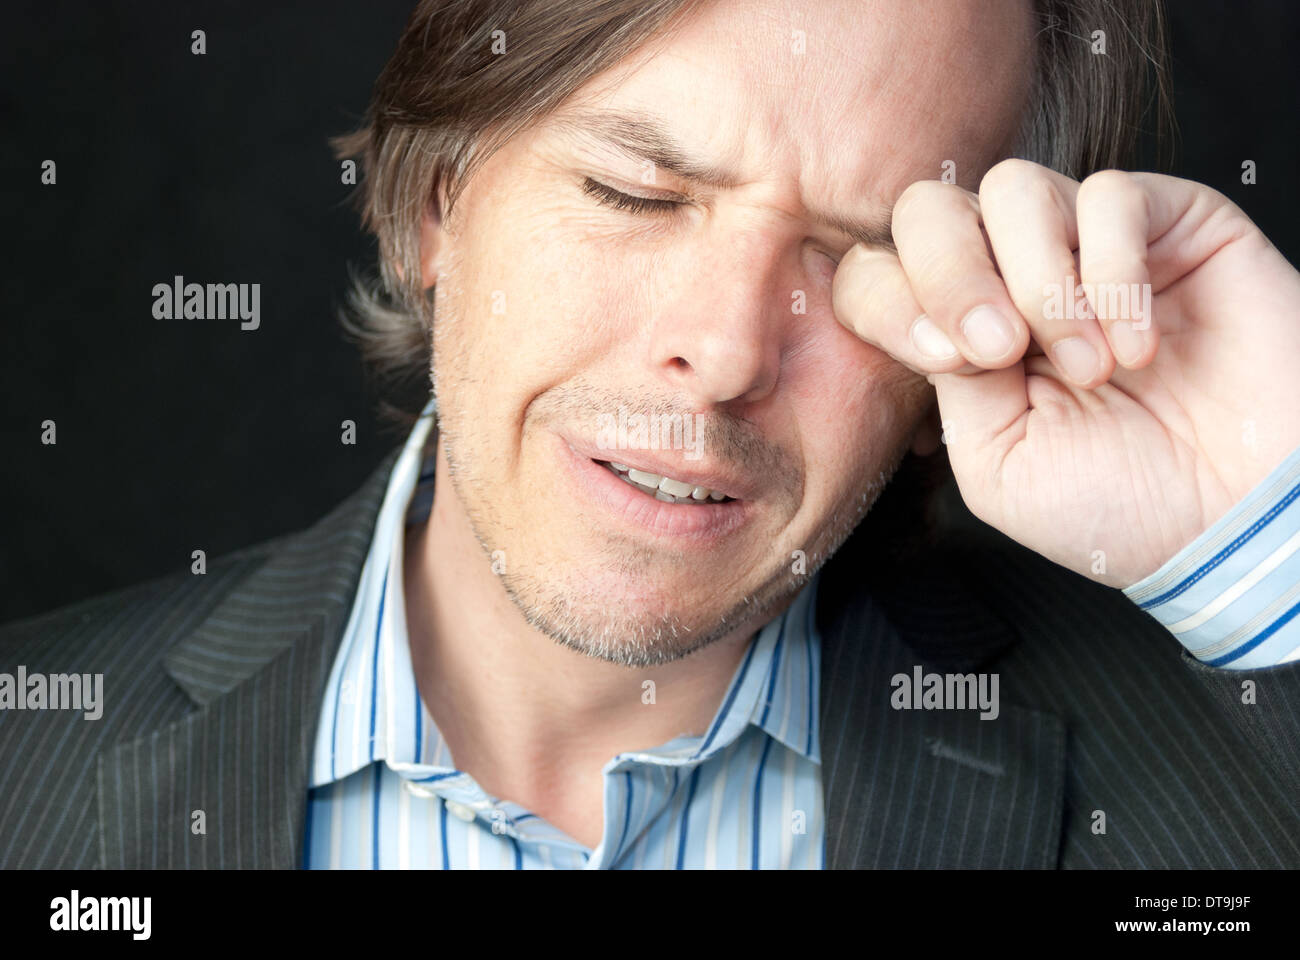 Close-up of a stressed businessman rubbing his eyes. Stock Photo